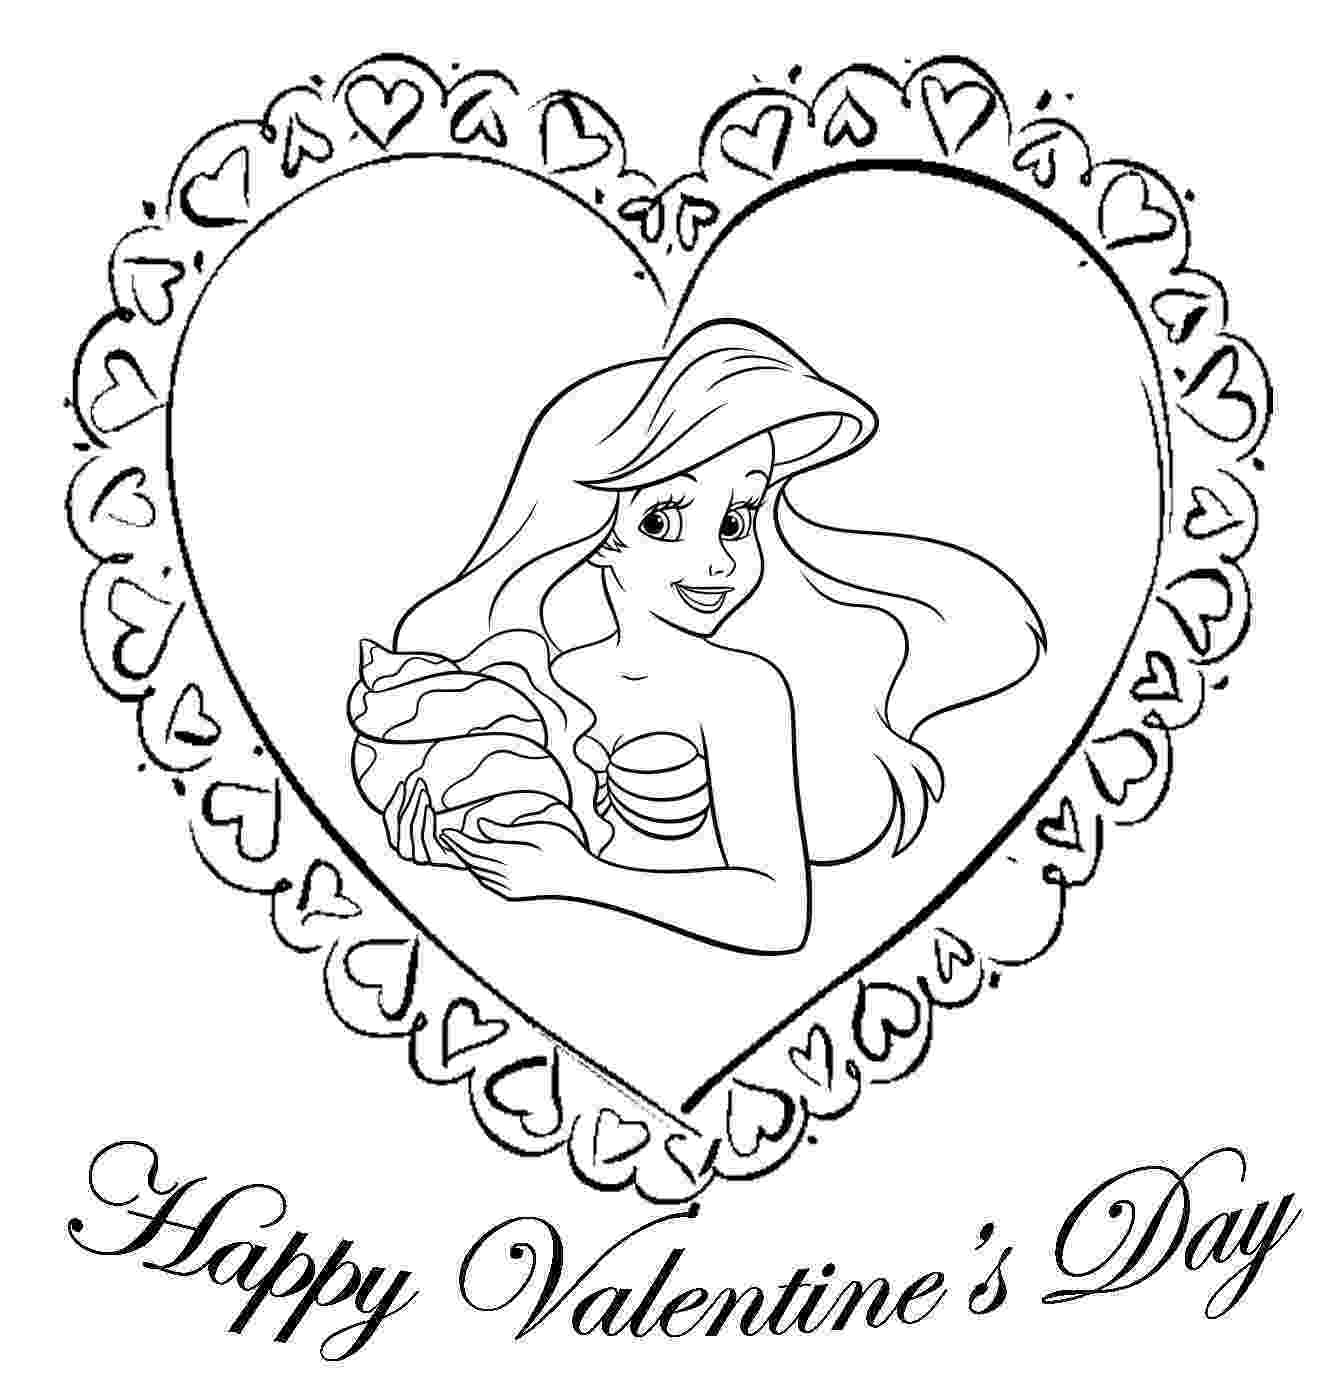 printable ariel coloring pages ariel coloring pages to download and print for free pages ariel coloring printable 